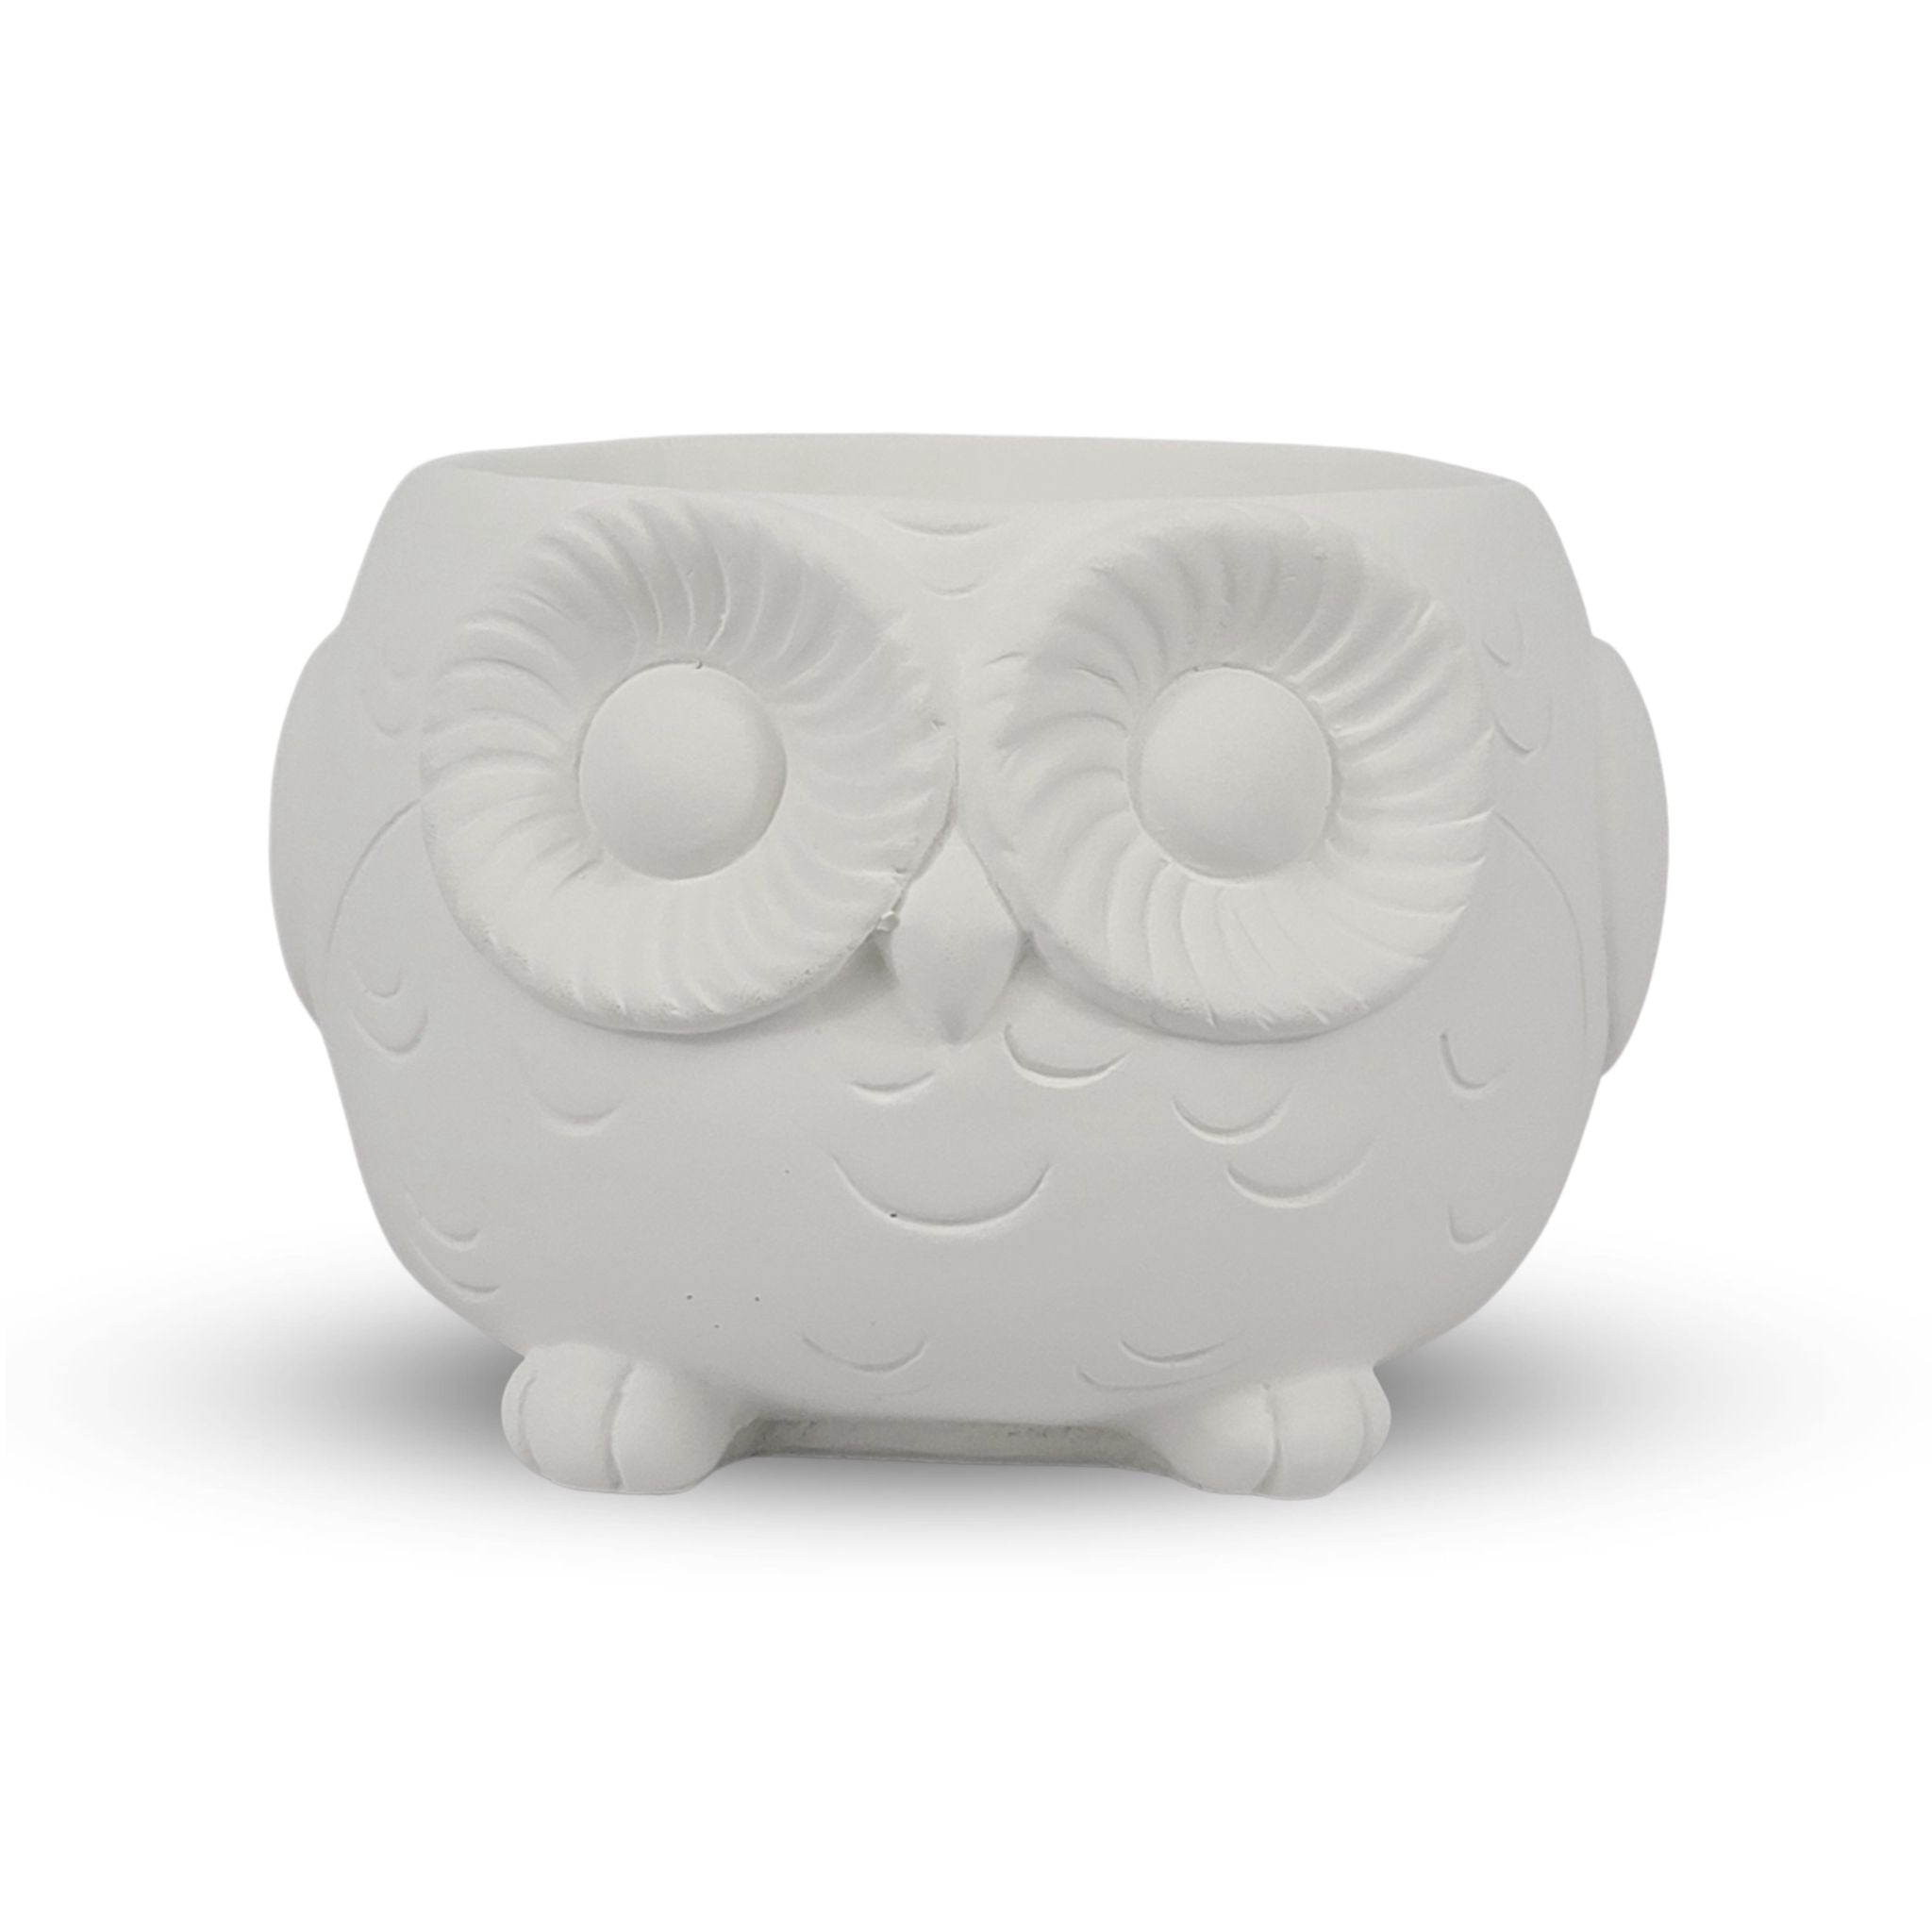 Wise Wings Owl Planter - White